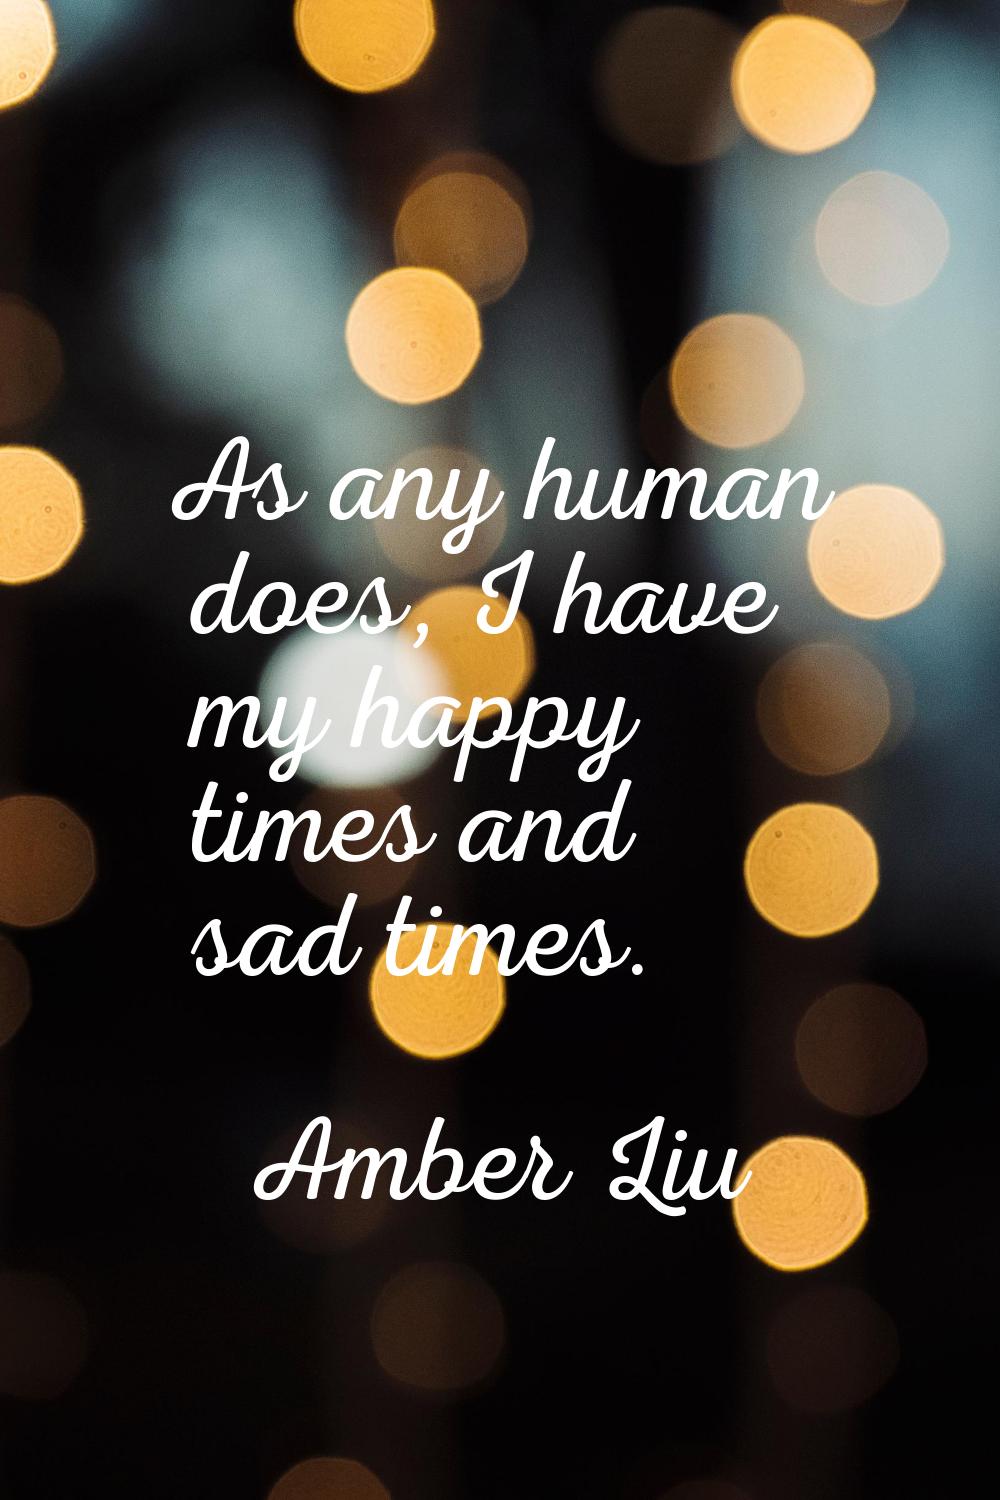 As any human does, I have my happy times and sad times.